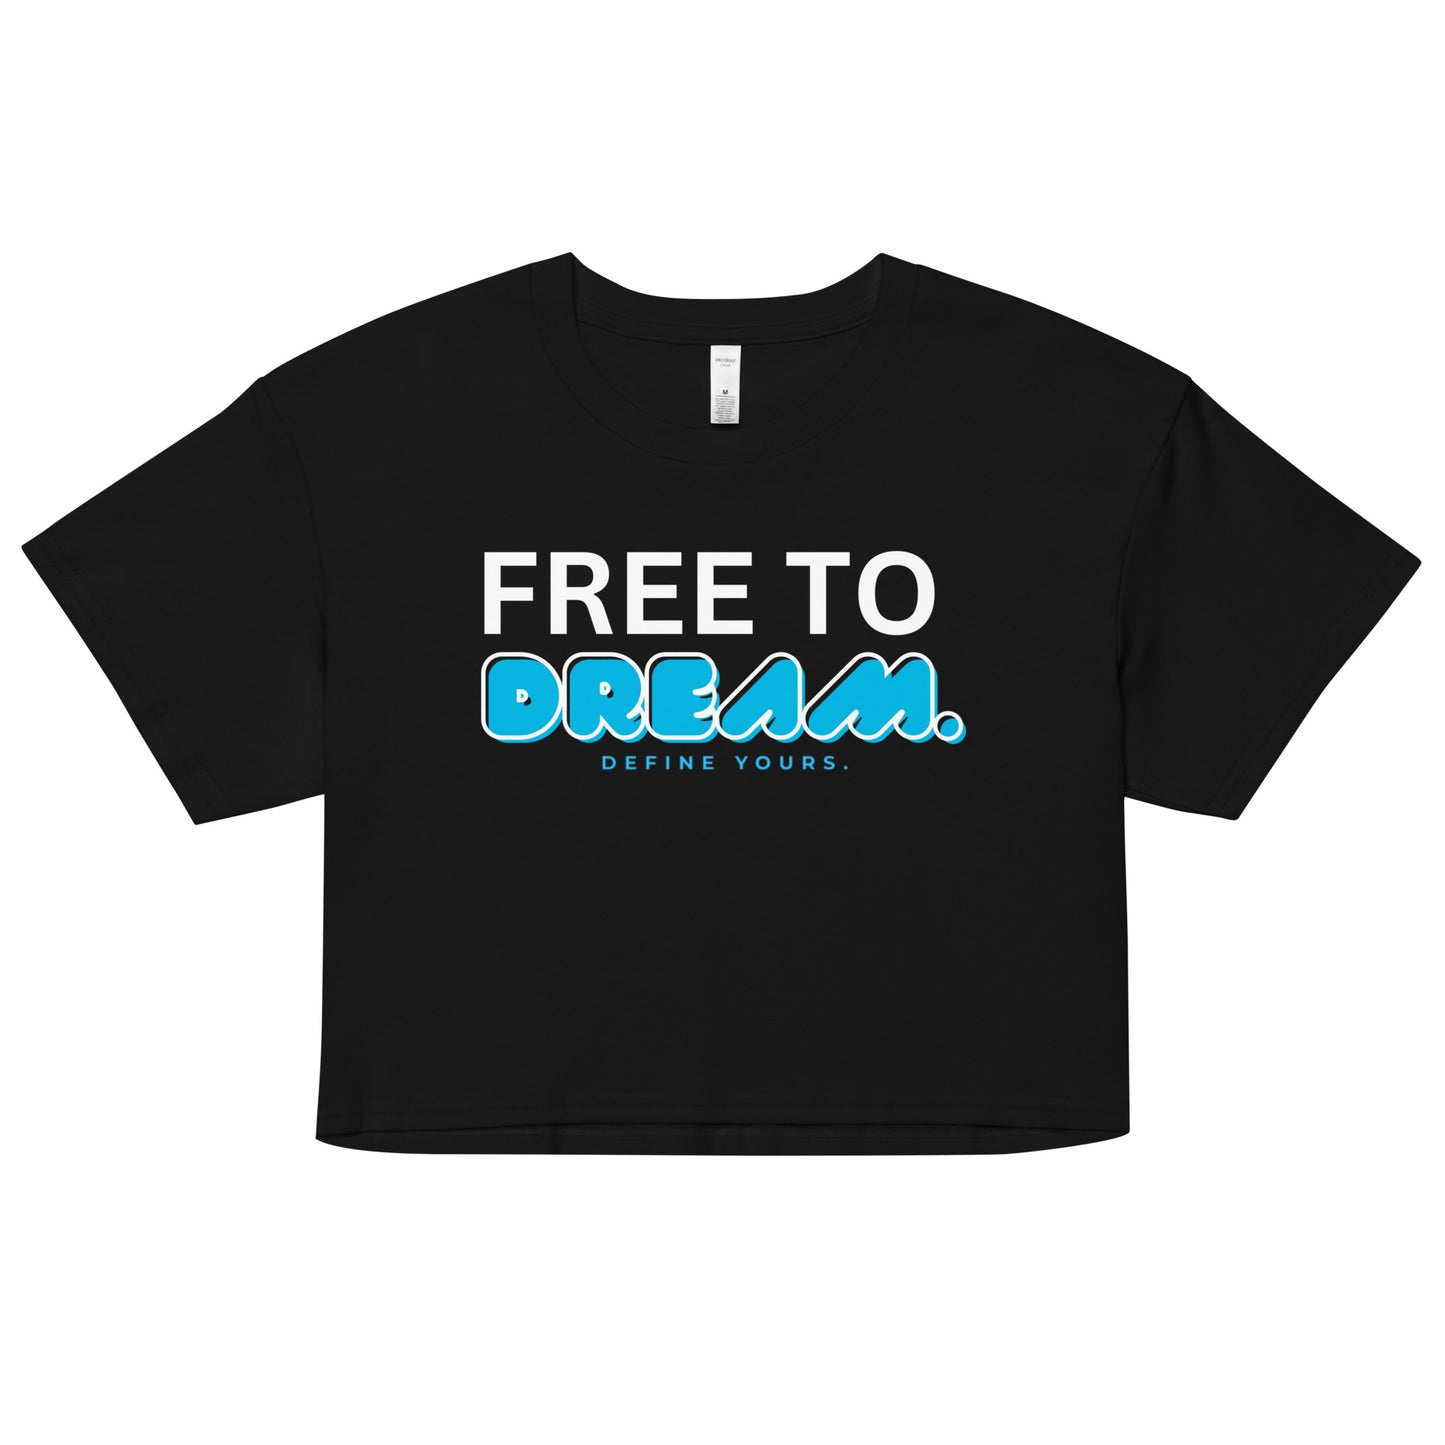 Free To Dream Relaxed Crop Top